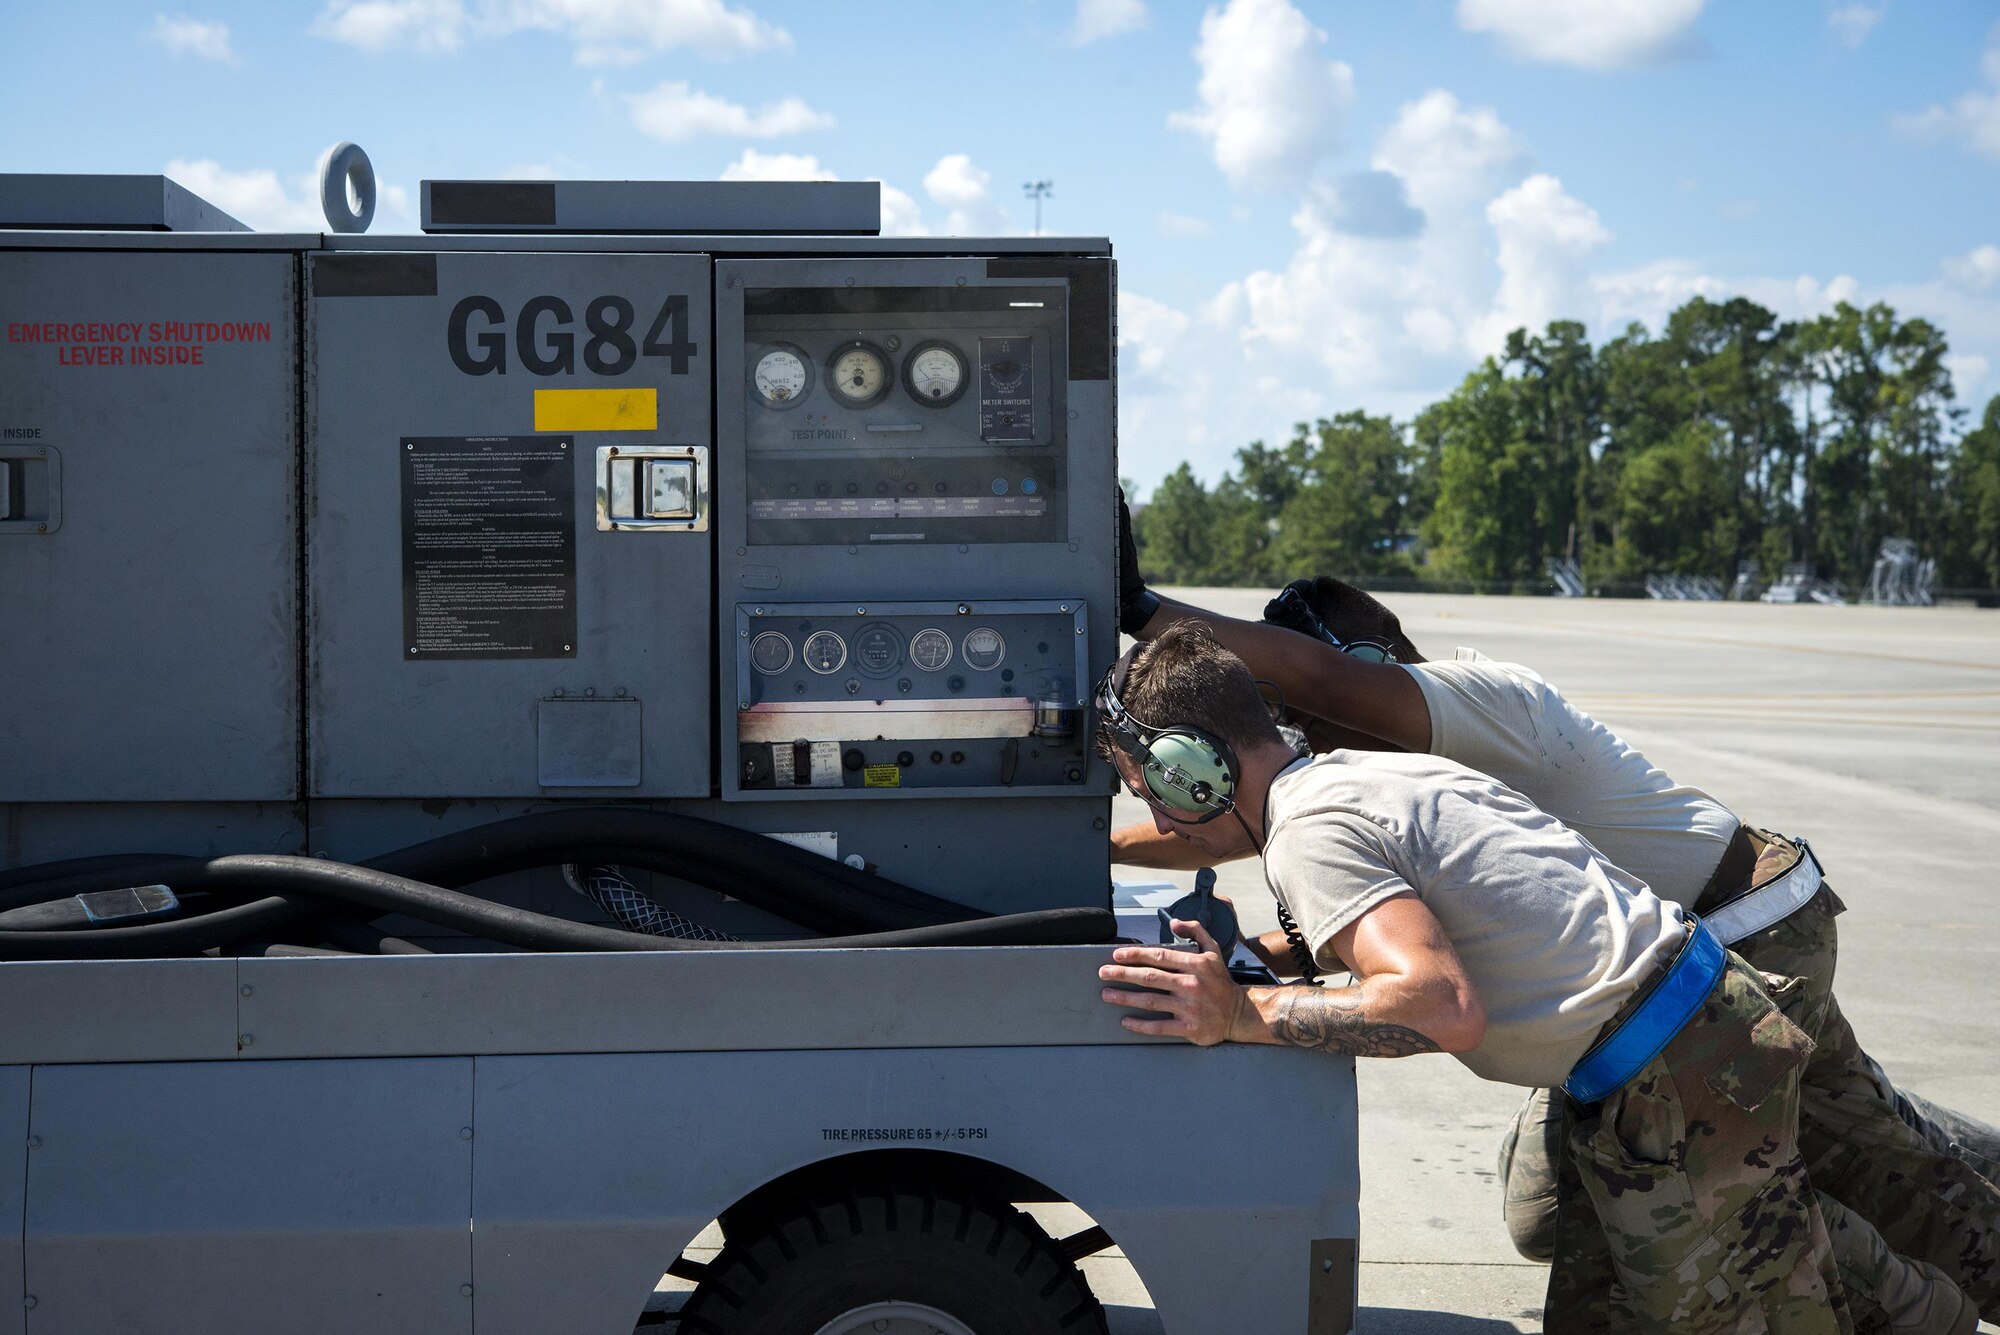 Airmen from the 71st Rescue Squadron Aircraft Maintenance Unit clear a power unit off the flight line prior to launching a HC-130J Combat King II before it takes off, Aug. 17, 2017, at Moody Air Force Base, Ga. Maintainers perform various tasks prior to take-off such as pre-flight inspections, removing plugs and covers, repairing any problems found during crew pre-flight checks and marshalling the aircraft. (U.S. Air Force photo by Airman 1st Class Erick Requadt)